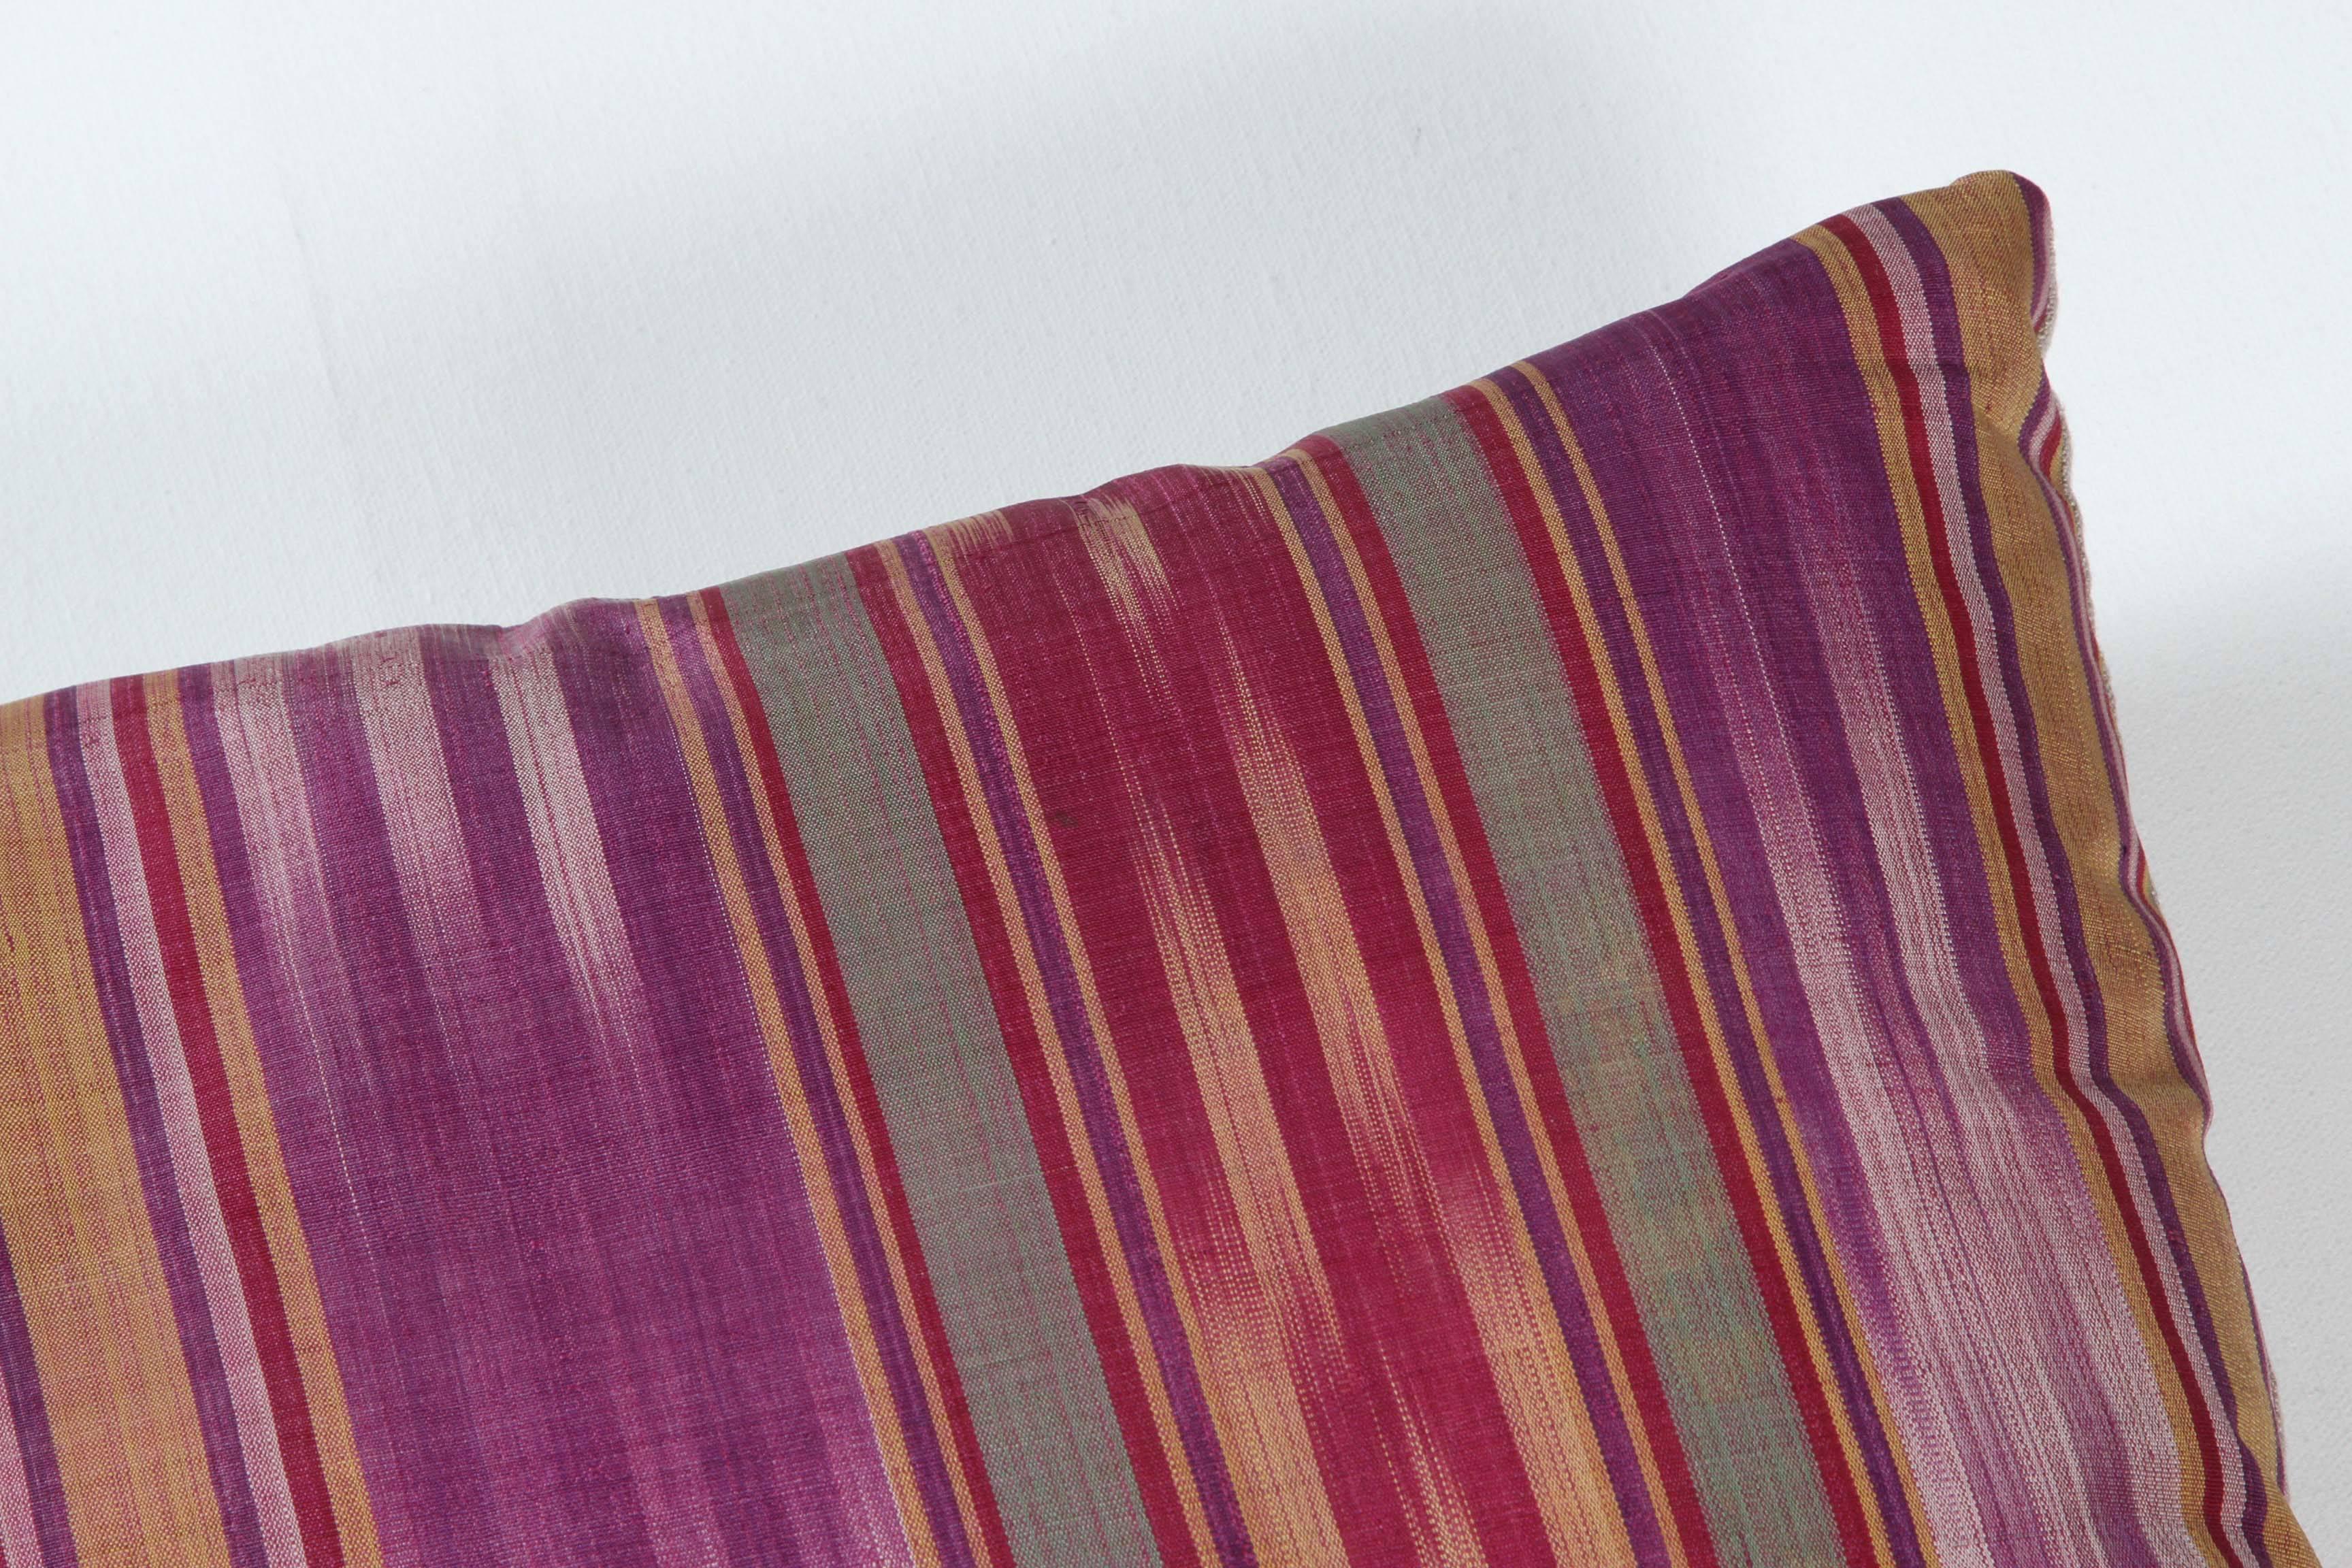 Hand-Woven Central Asian Silk Ikat Pillow, Red, Pink, Gold, Green and Purple For Sale